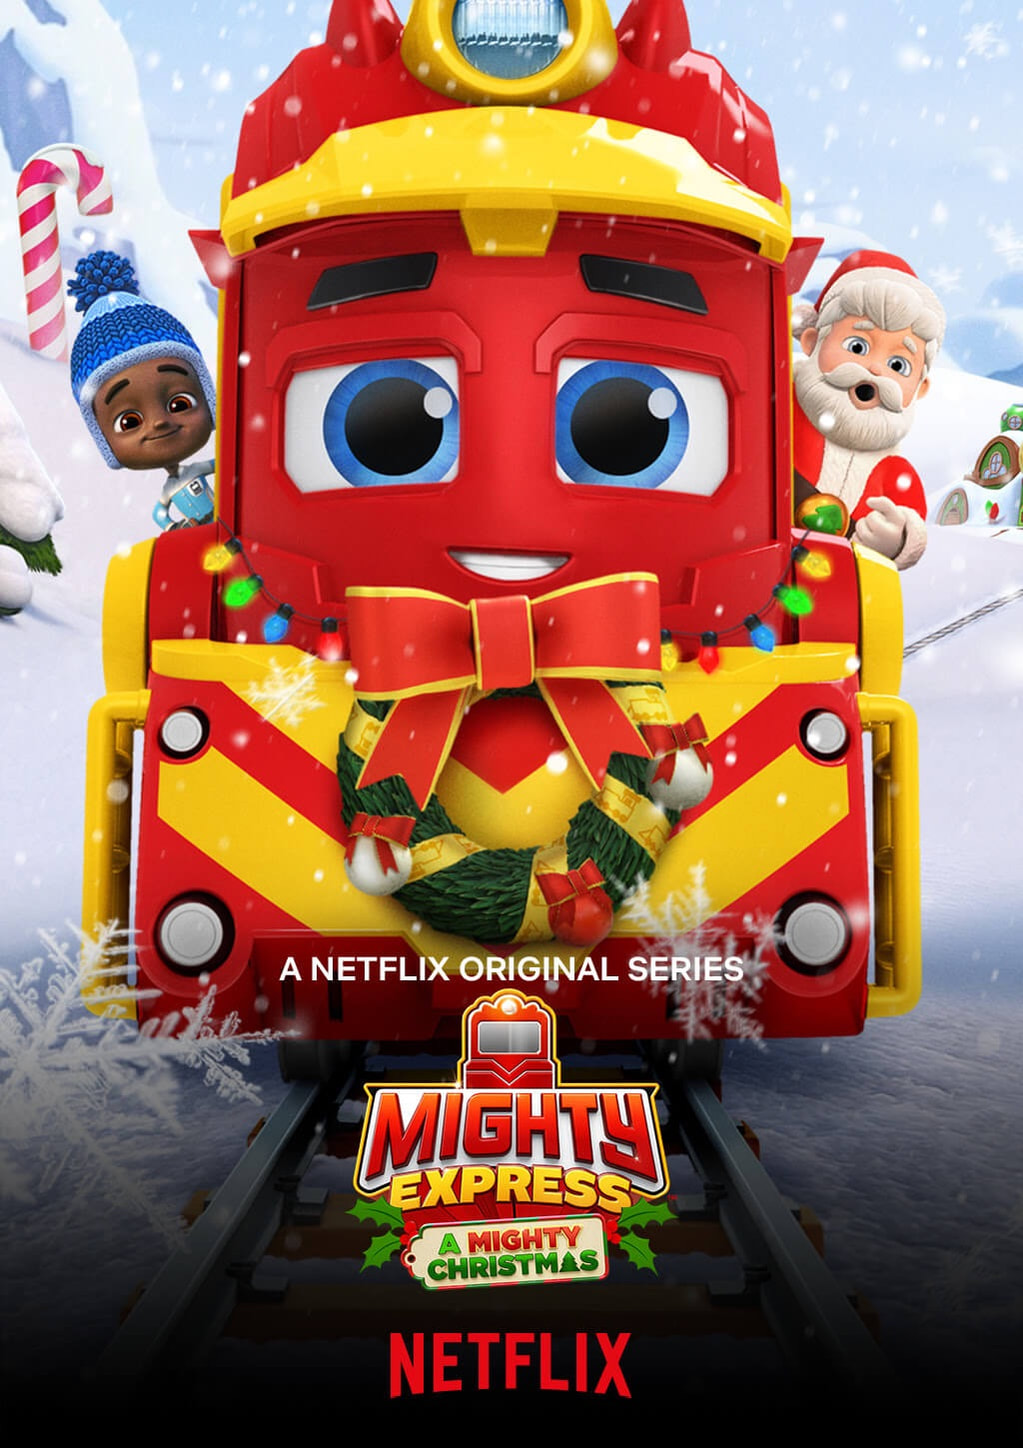 A Mighty Christmas | Mighty Express Holiday Special